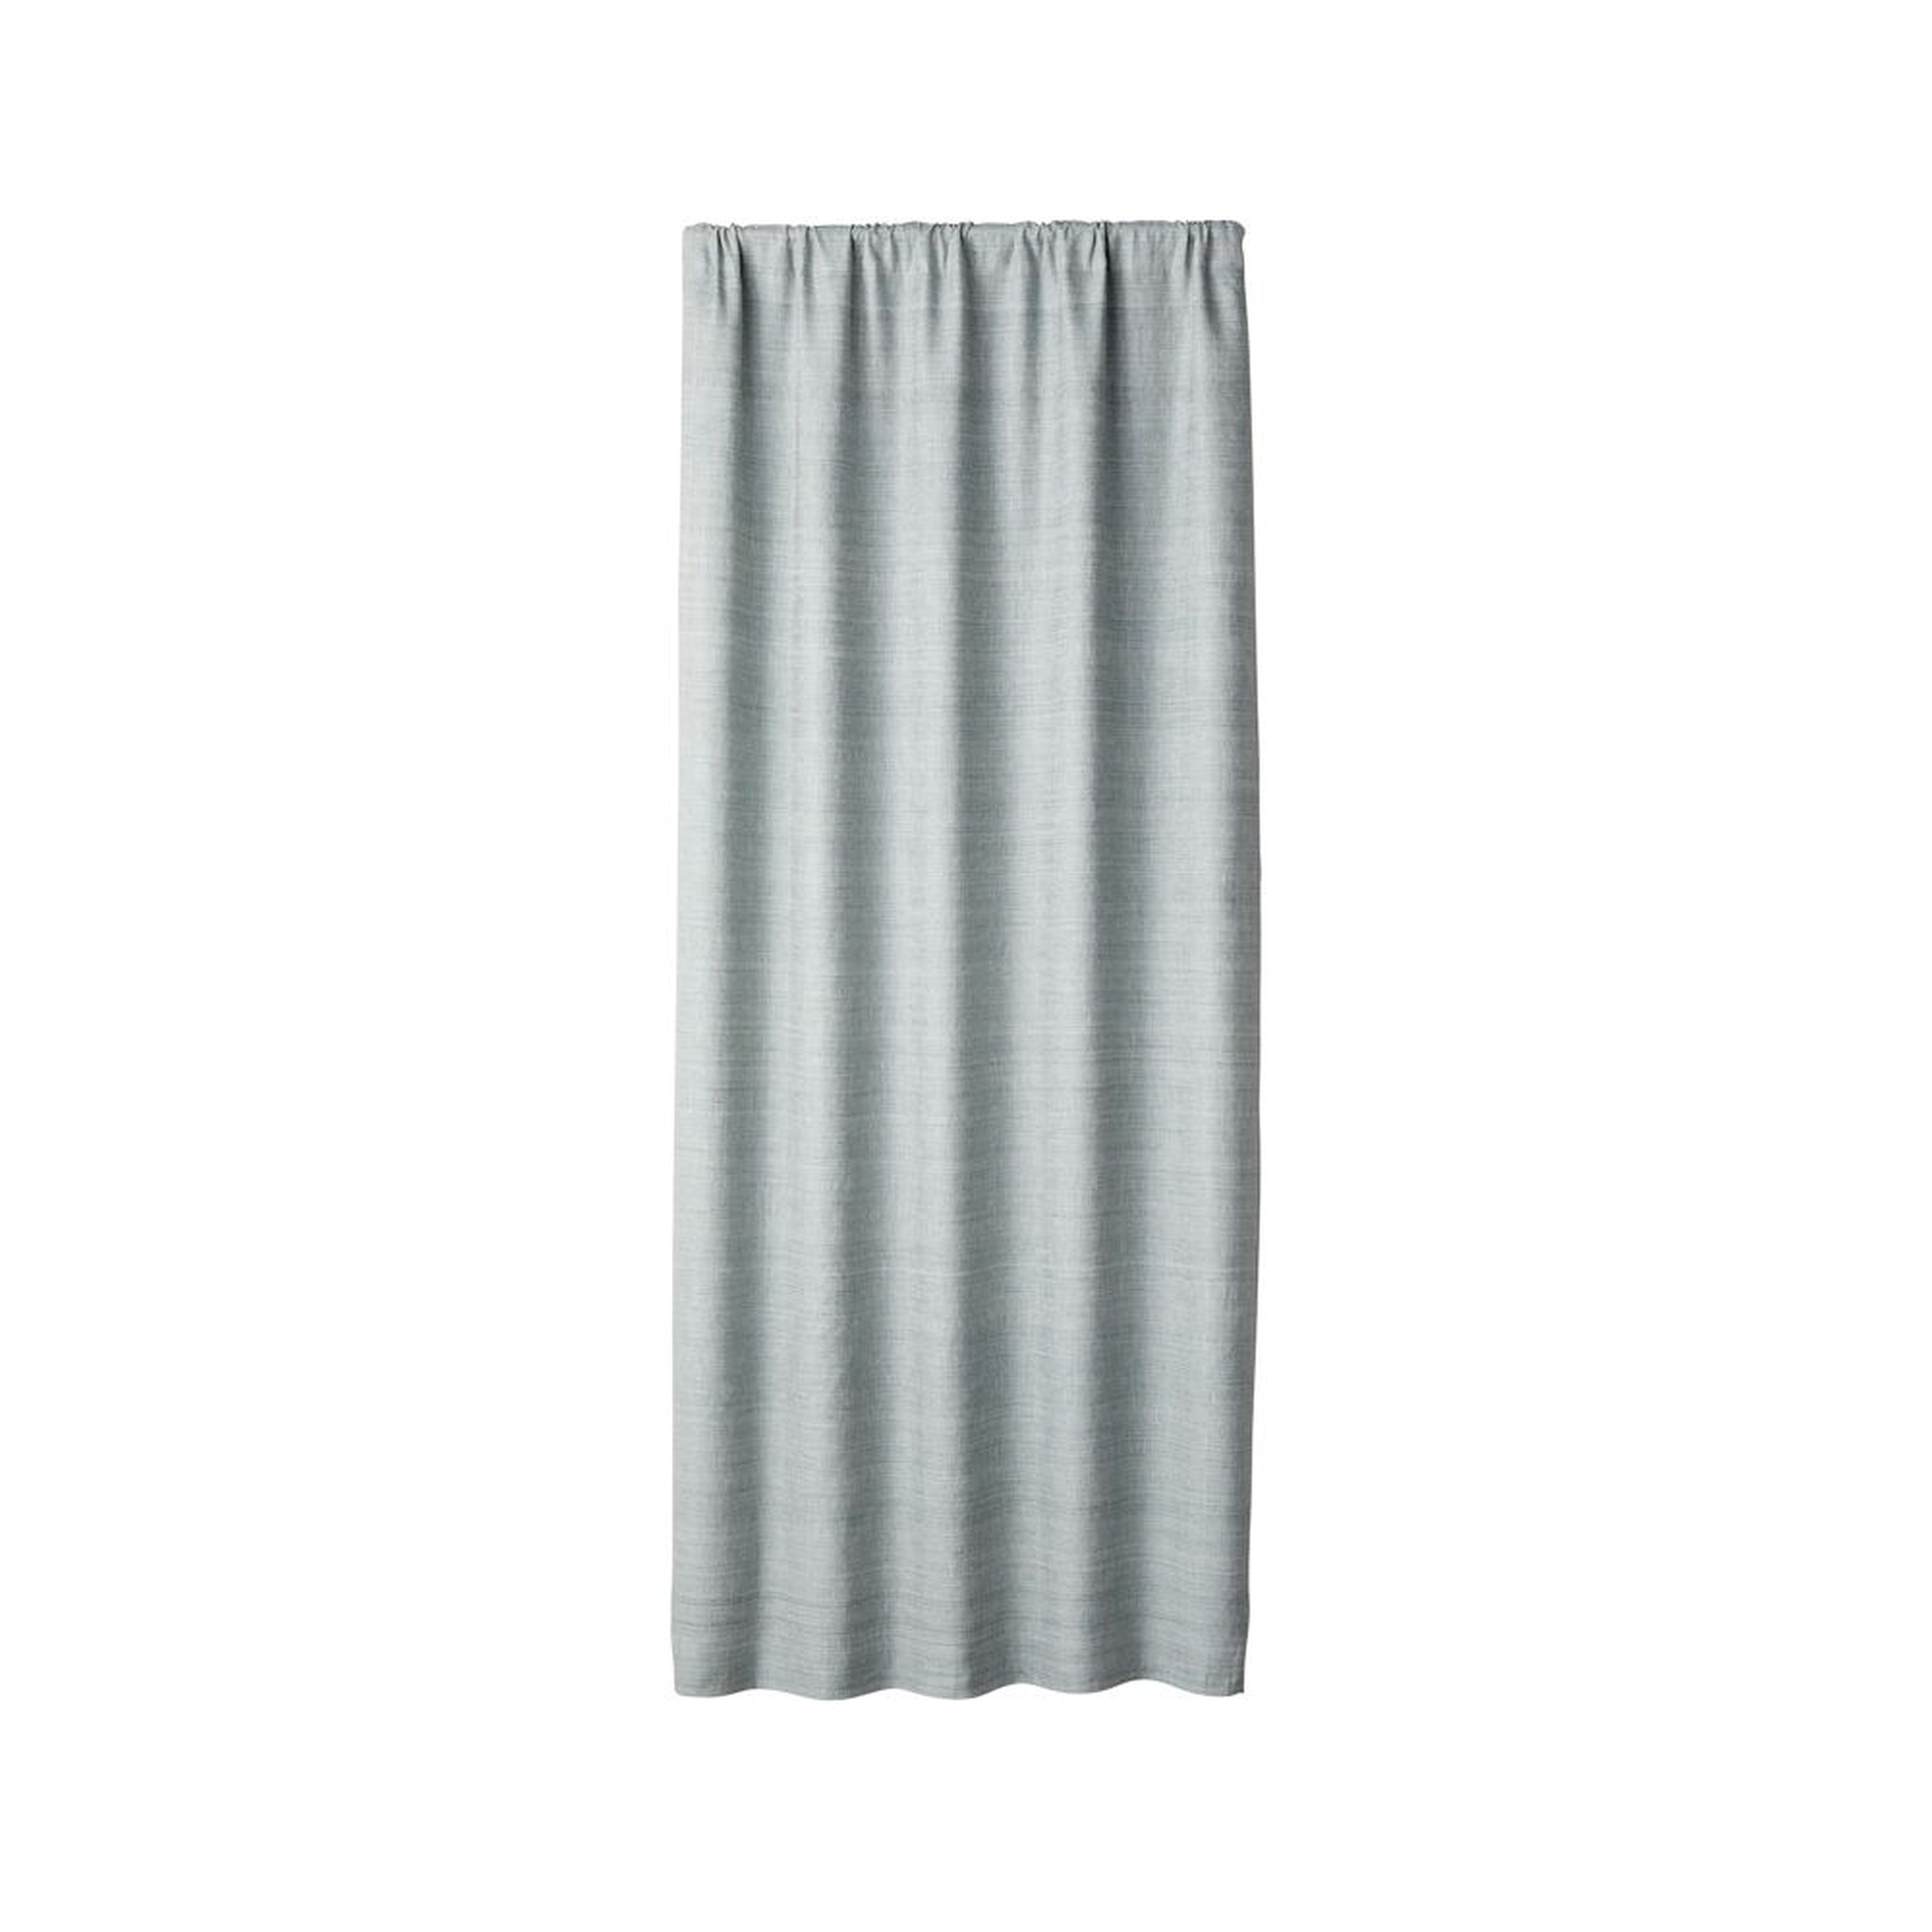 Silvana Silk Abyss Blackout Curtain Panel 48"x96" - Crate and Barrel